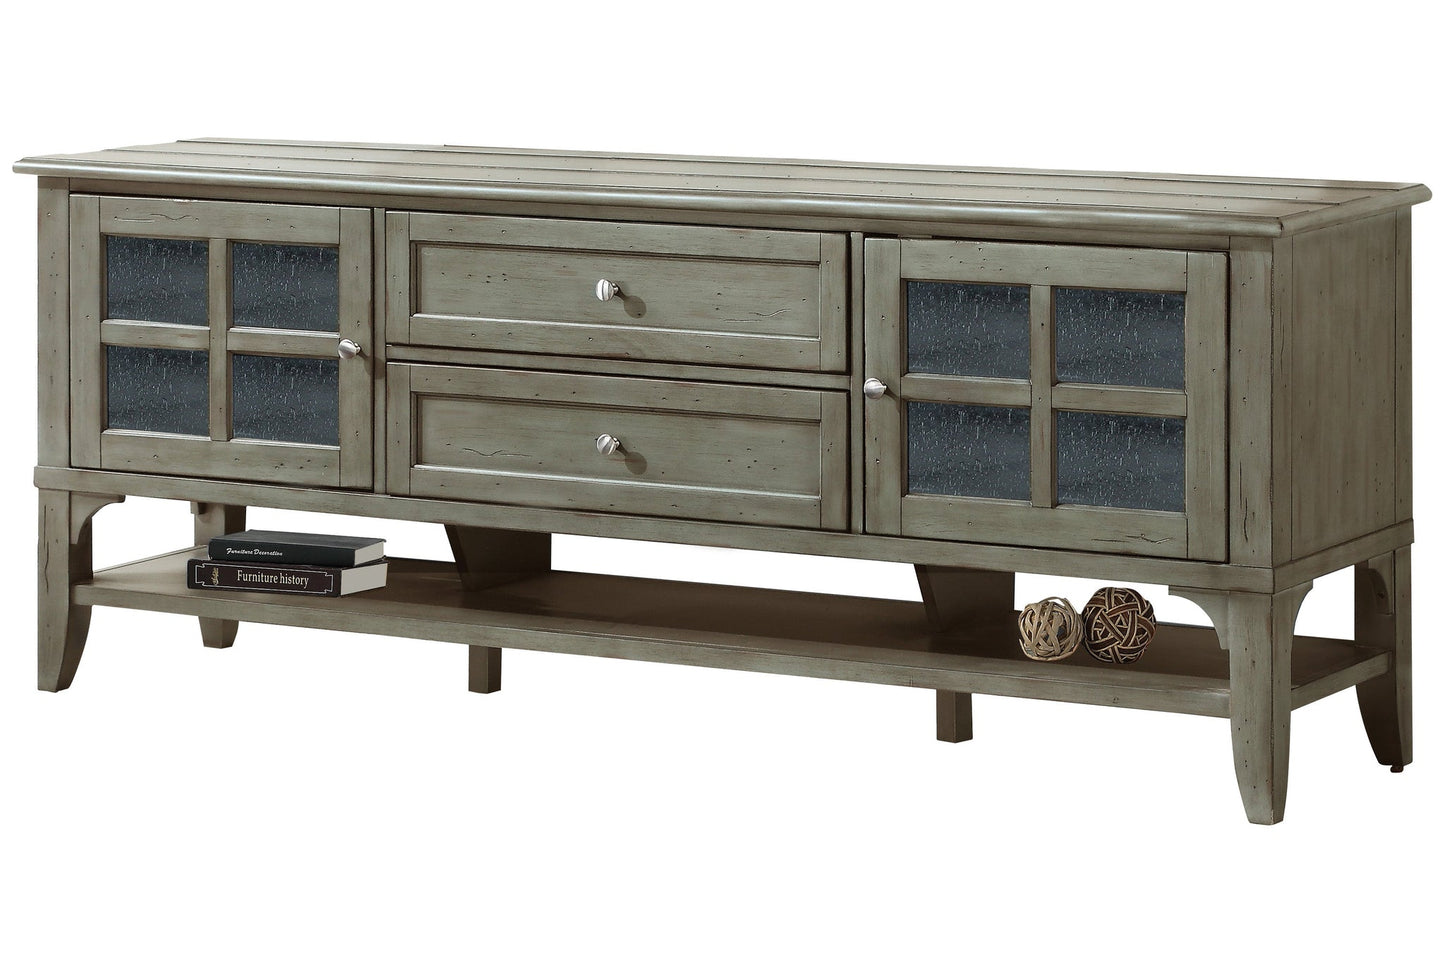 HIGHLAND 76 IN. TV CONSOLE